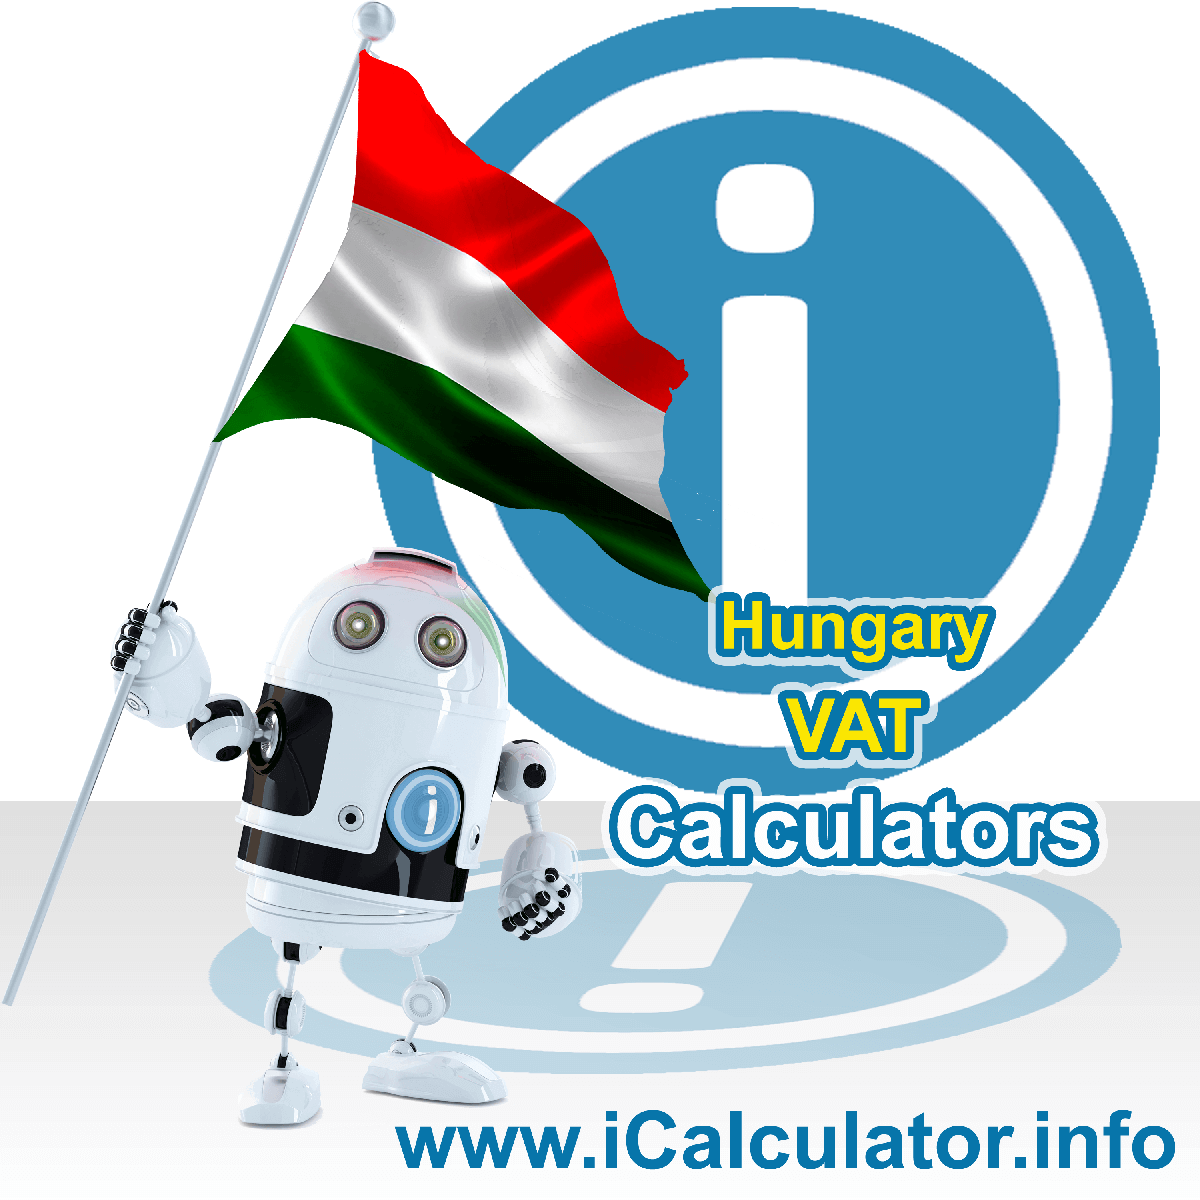 Hungary VAT Calculator. This image shows the Hungary flag and information relating to the VAT formula used for calculating Value Added Tax in Hungary using the Hungary VAT Calculator in 2023